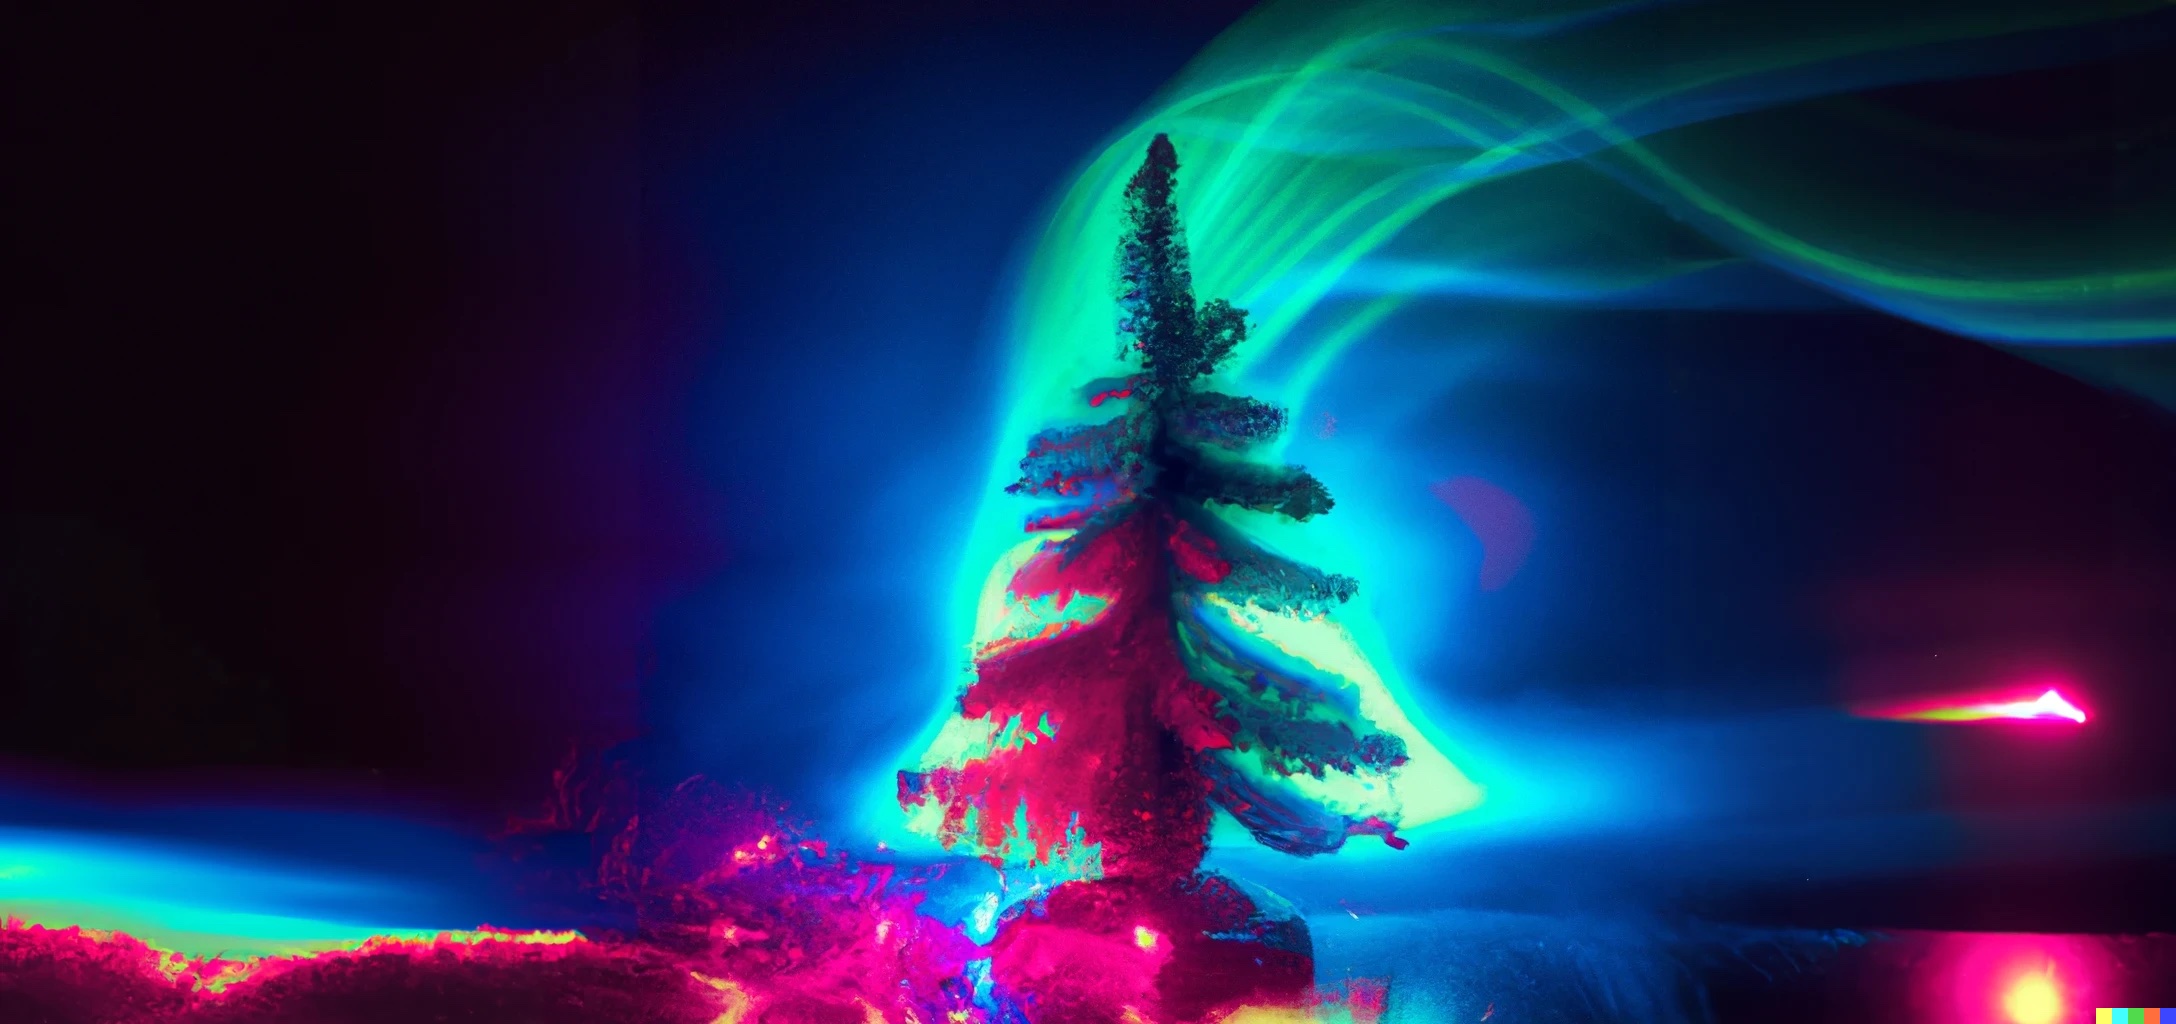 Image generated by DALL·E: A futuristic Christmas scene with a Christmas tree with candles, Lametta , synthwave style